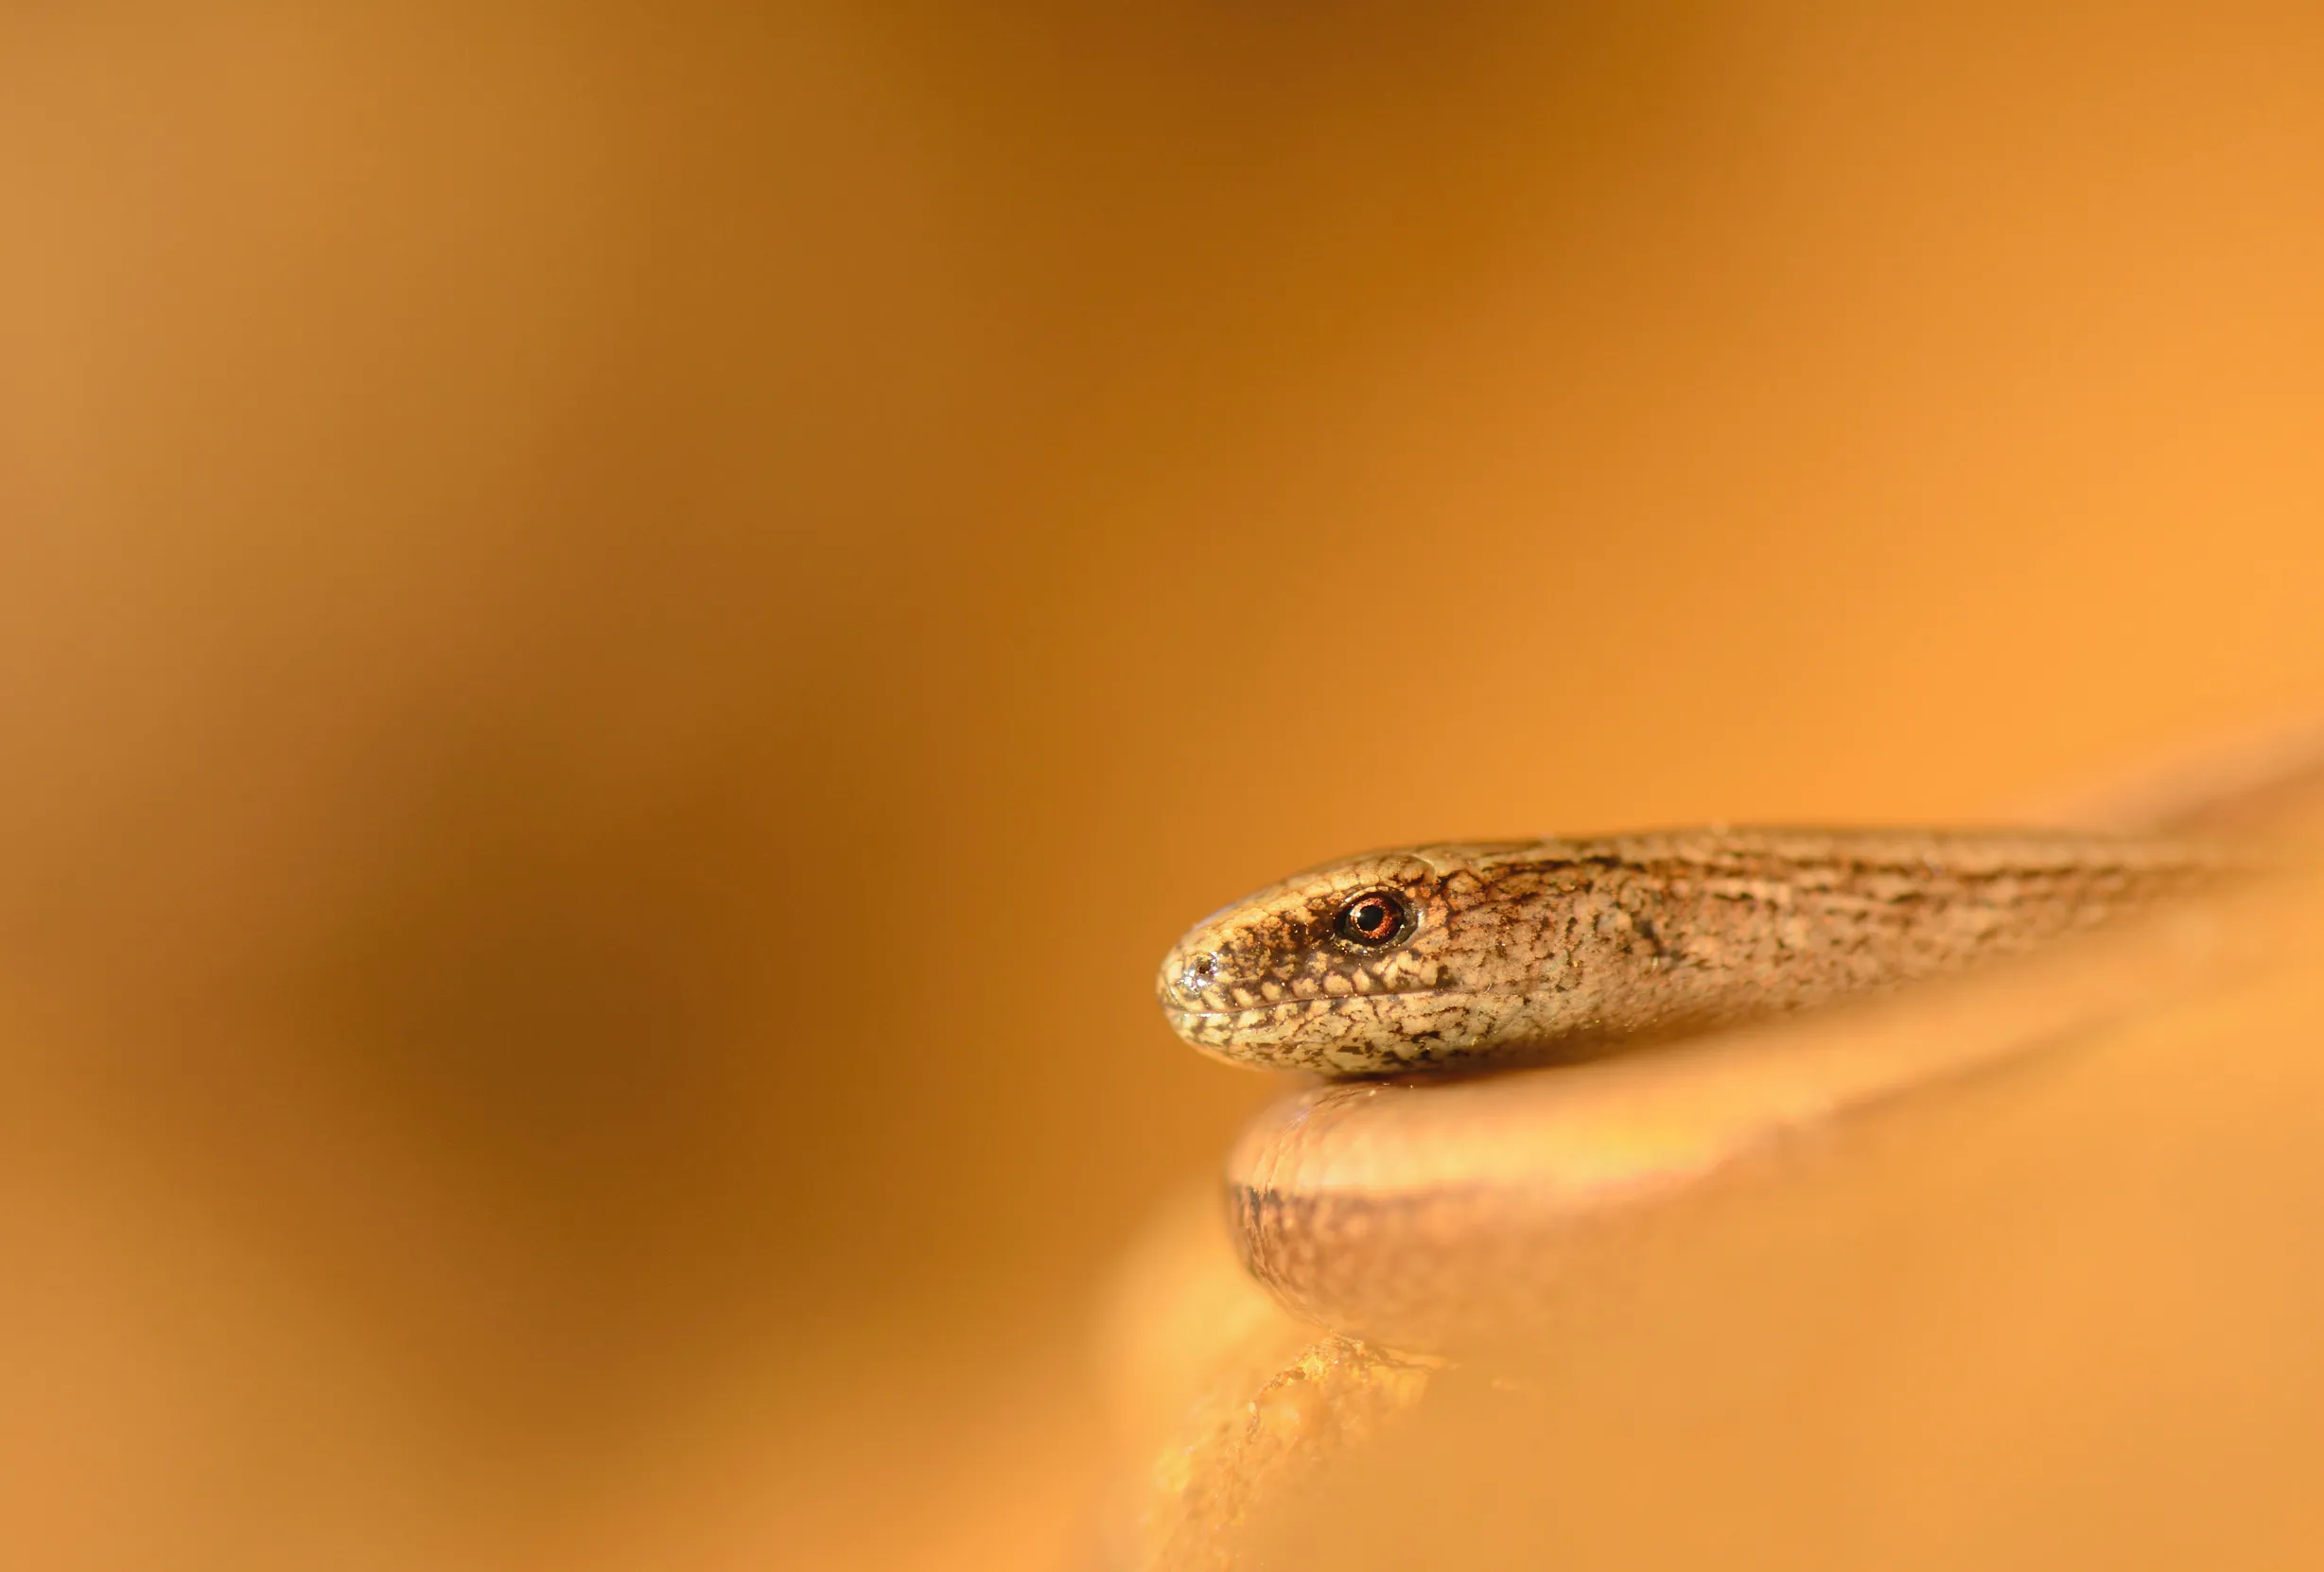 A close up of a Slow Worms head on a orange background.